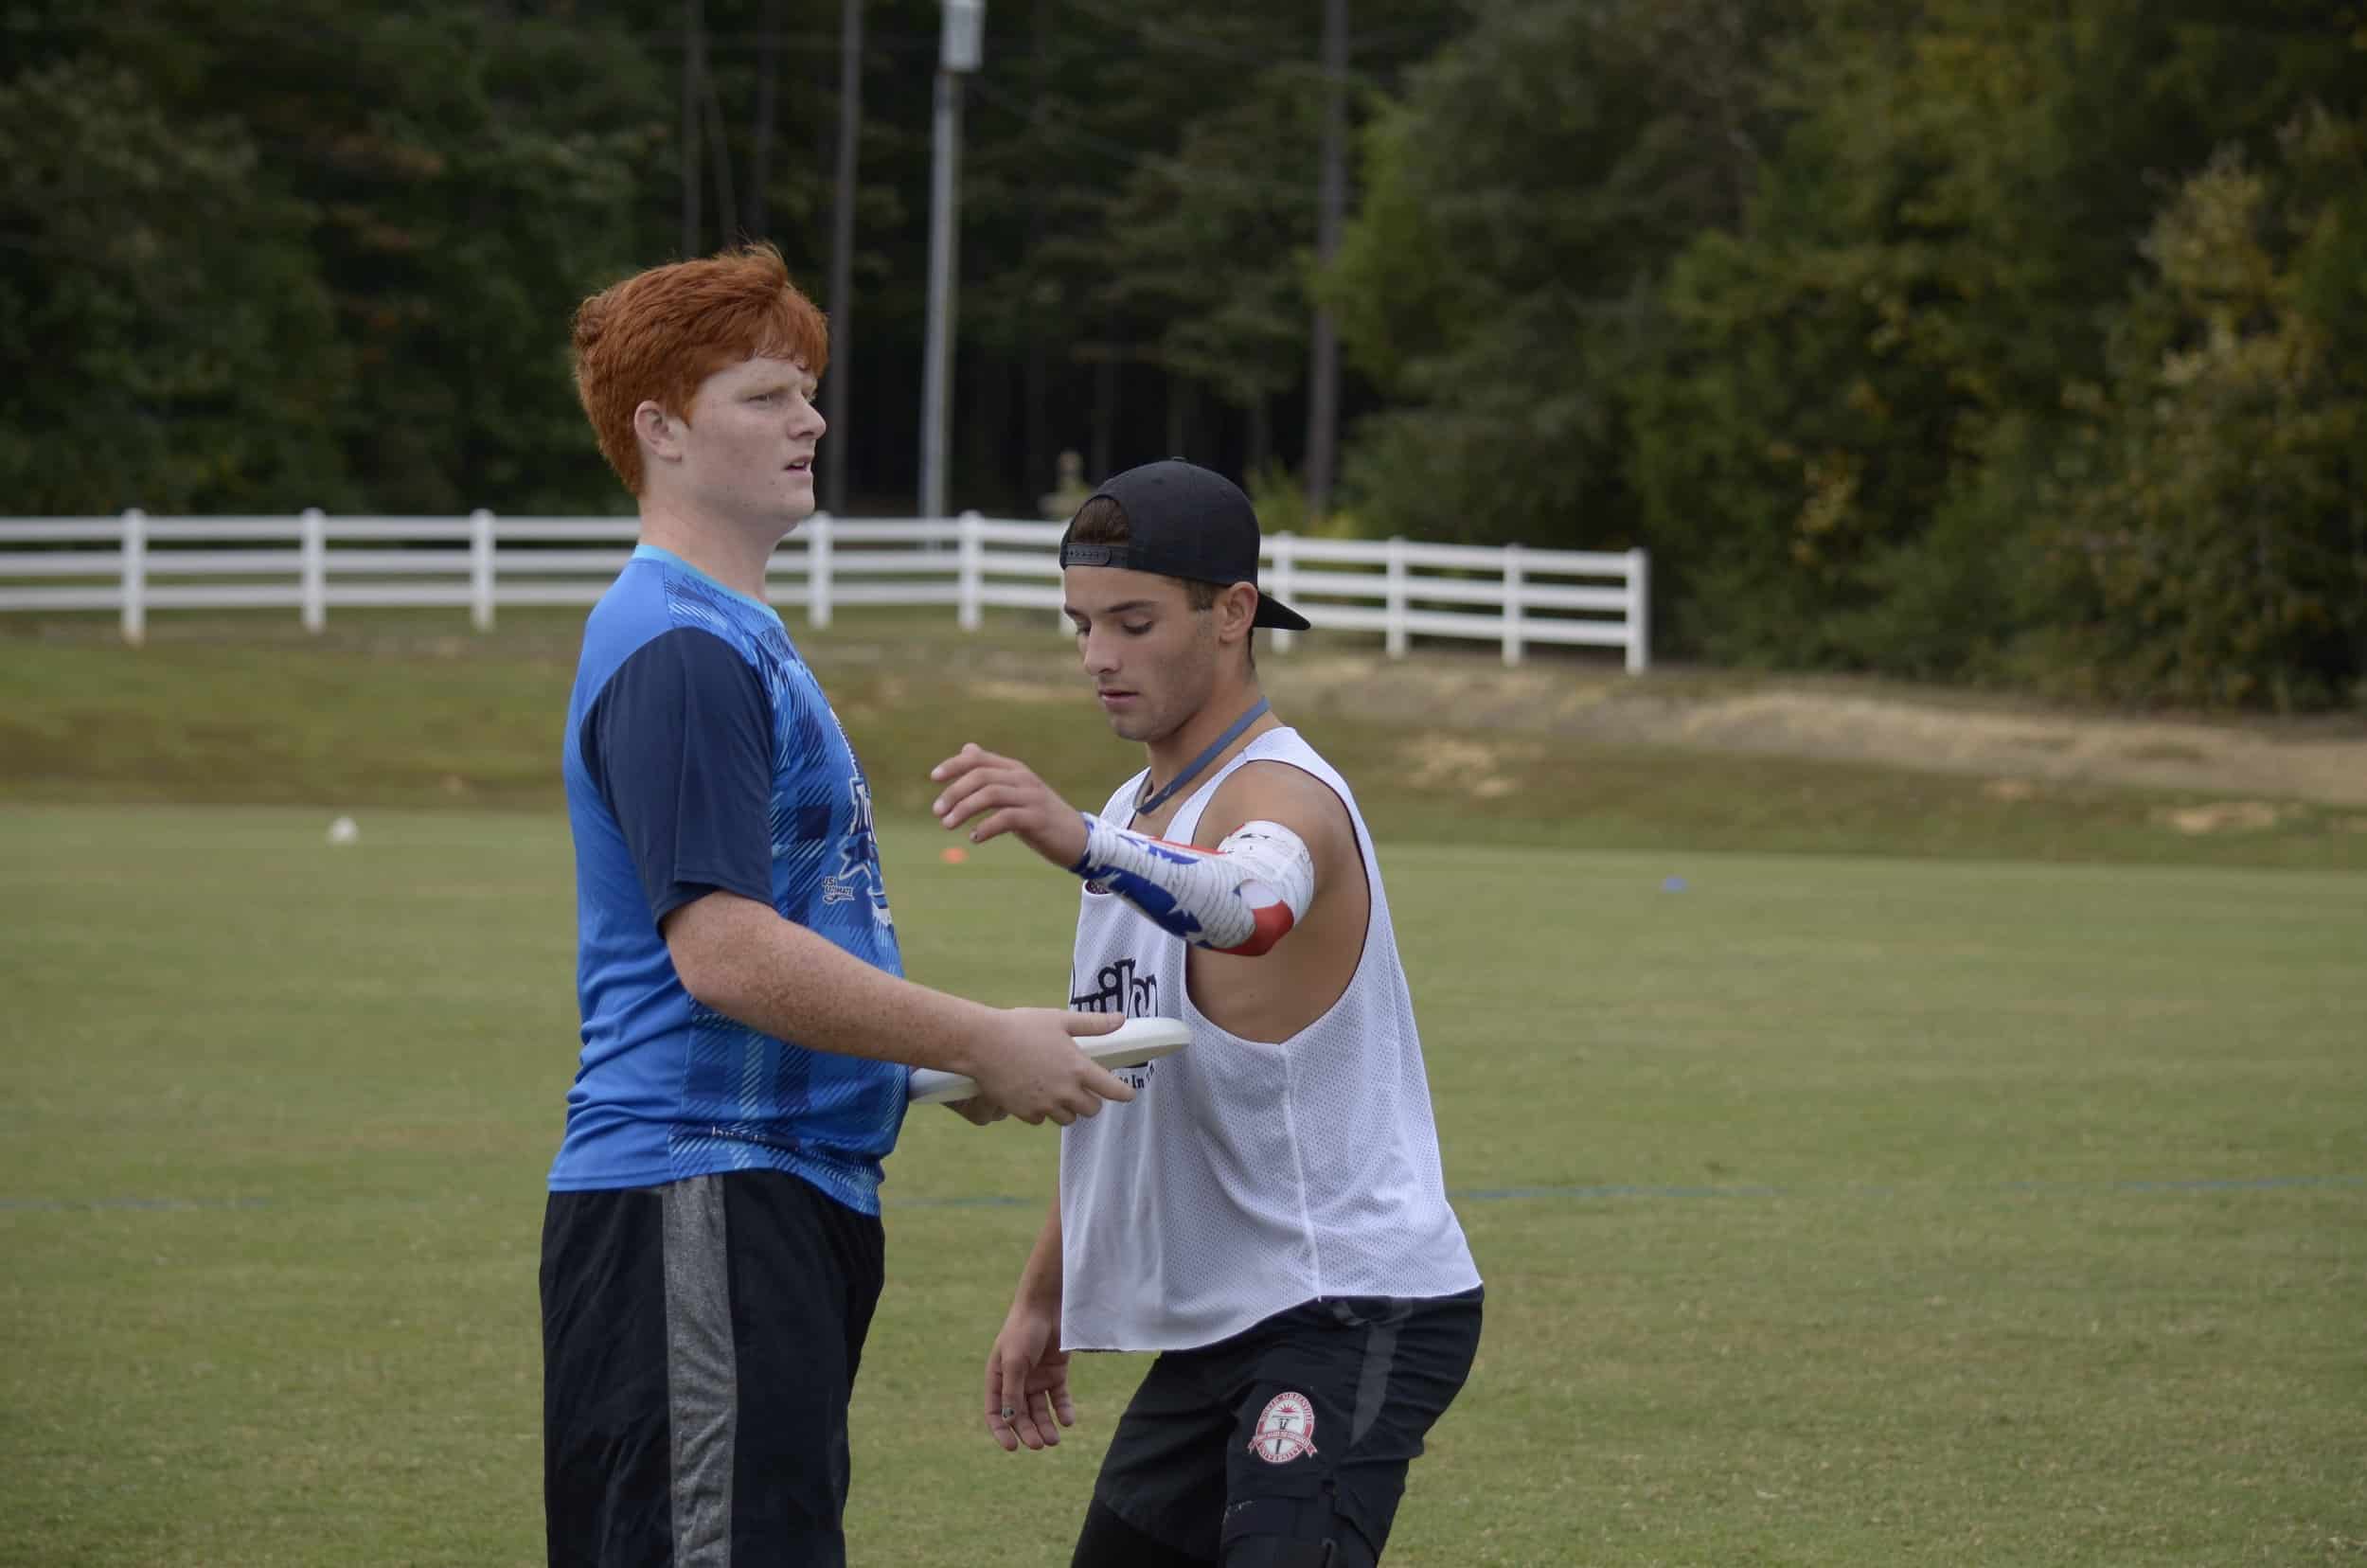 Freshman, Jordan Lewis, pays close attention to the disc in order to get a defensive block and turn the disc over.&nbsp;